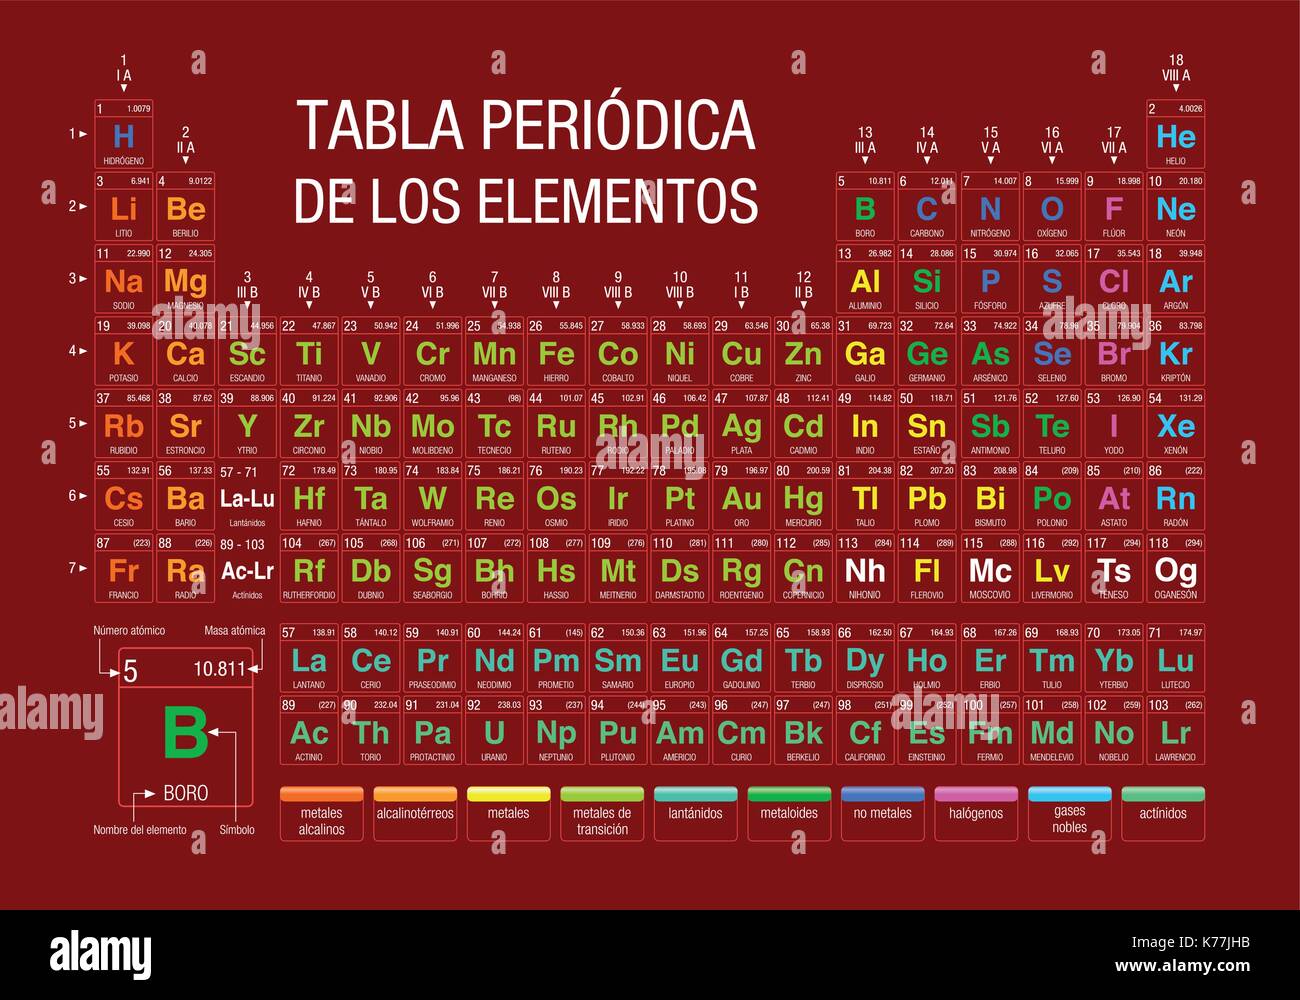 TABLA PERIODICA DE LOS ELEMENTOS -Periodic Table of Elements in Spanish language- on red background with the 4 new elements included Stock Vector